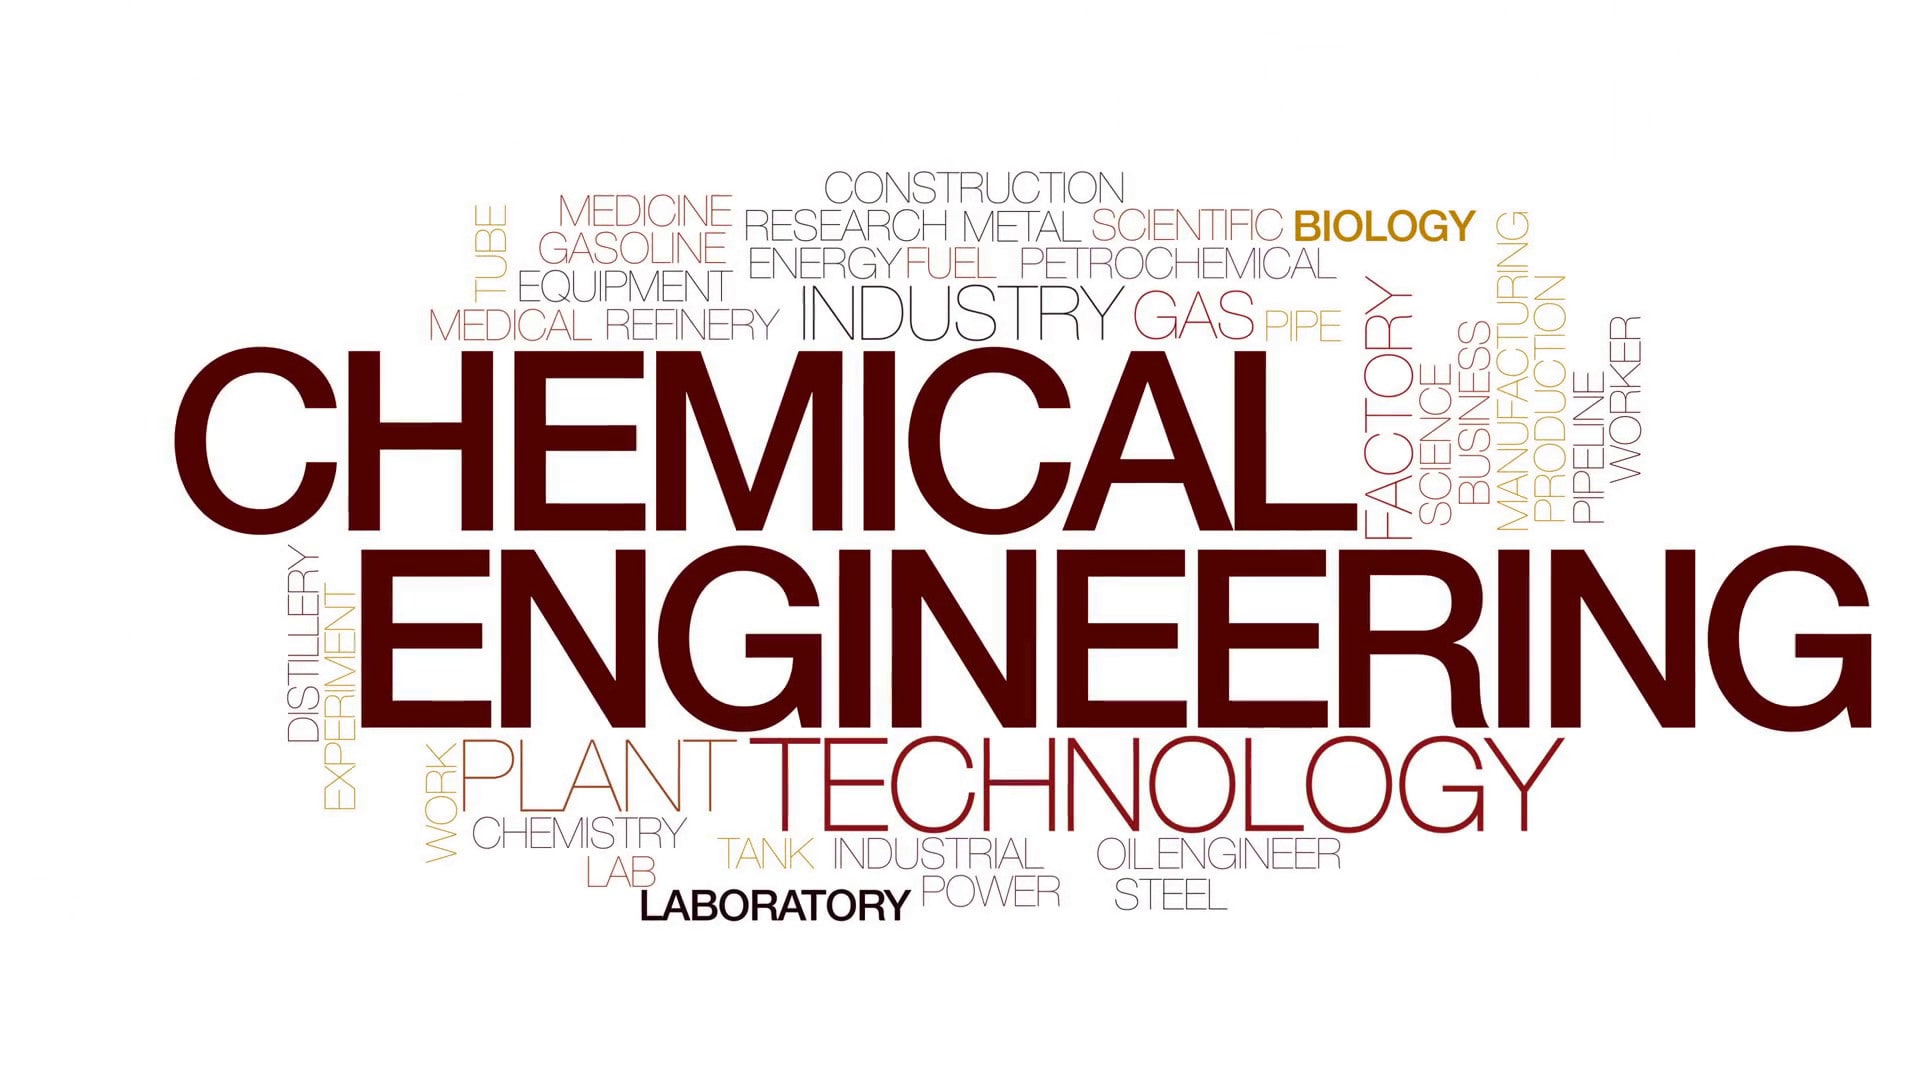 Do anything in chemical engineering by Bakhtaj | Fiverr